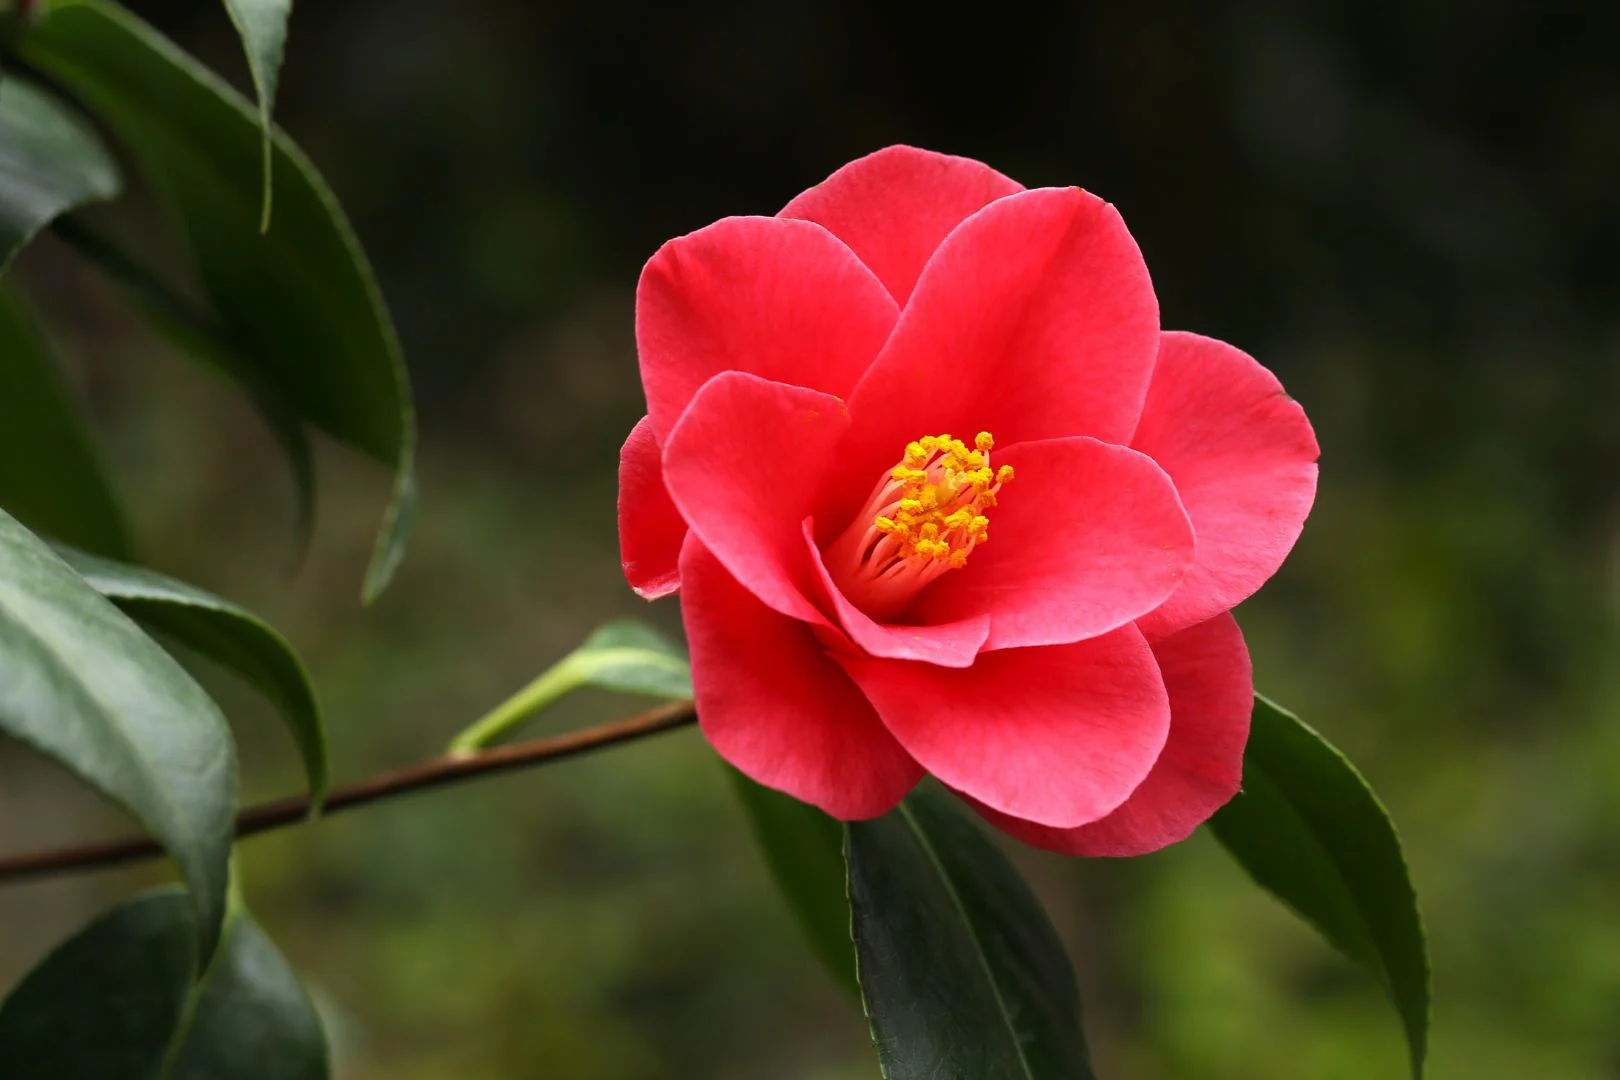 A close-up shot of a red camellia flower on a camellia plant. The petals are red-pink and rose-like and the stamens are yellow. The foliage is a deep green.